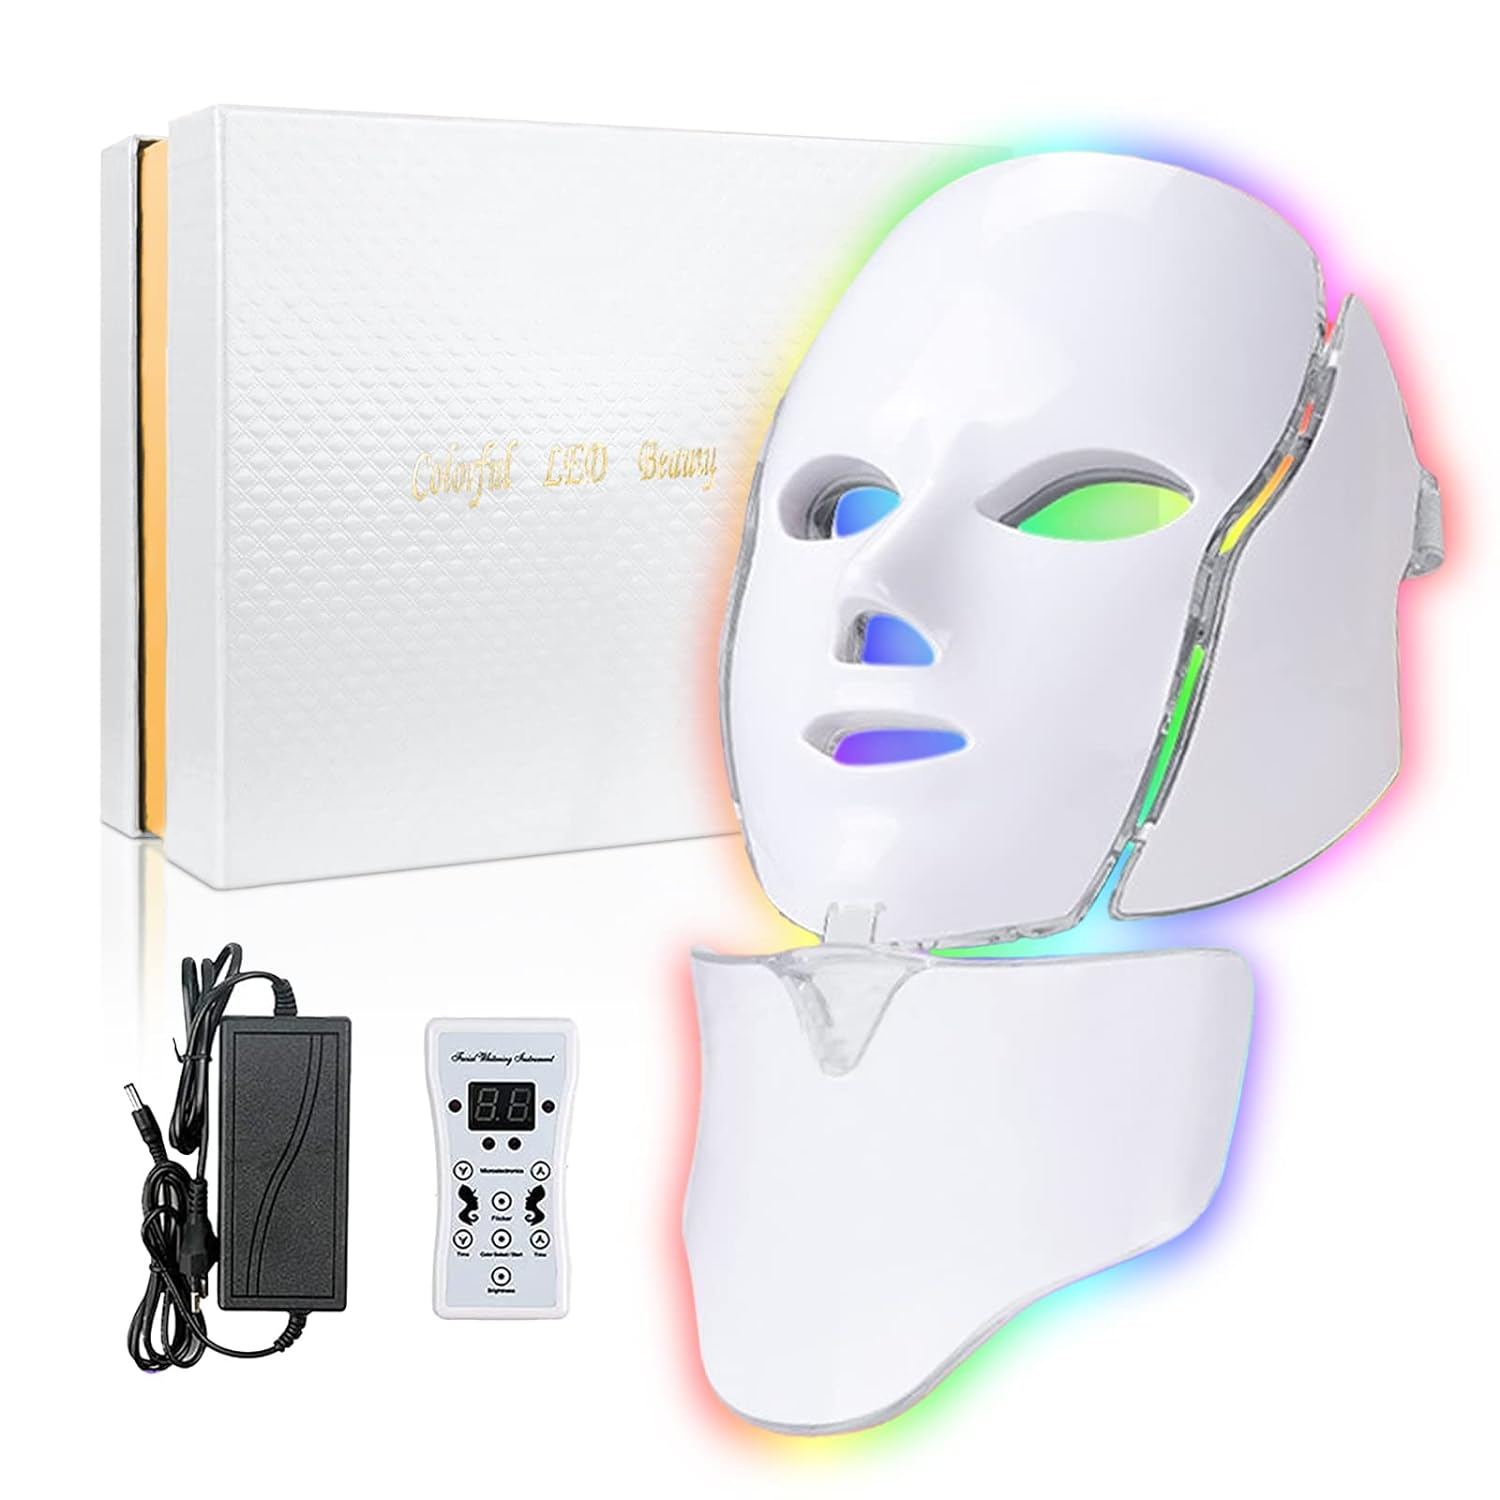 SDKWDH Led Face Mask Light Therapy, Red Light Therapy for Face, 7-1 Colors LED Facial Skin Care Mask